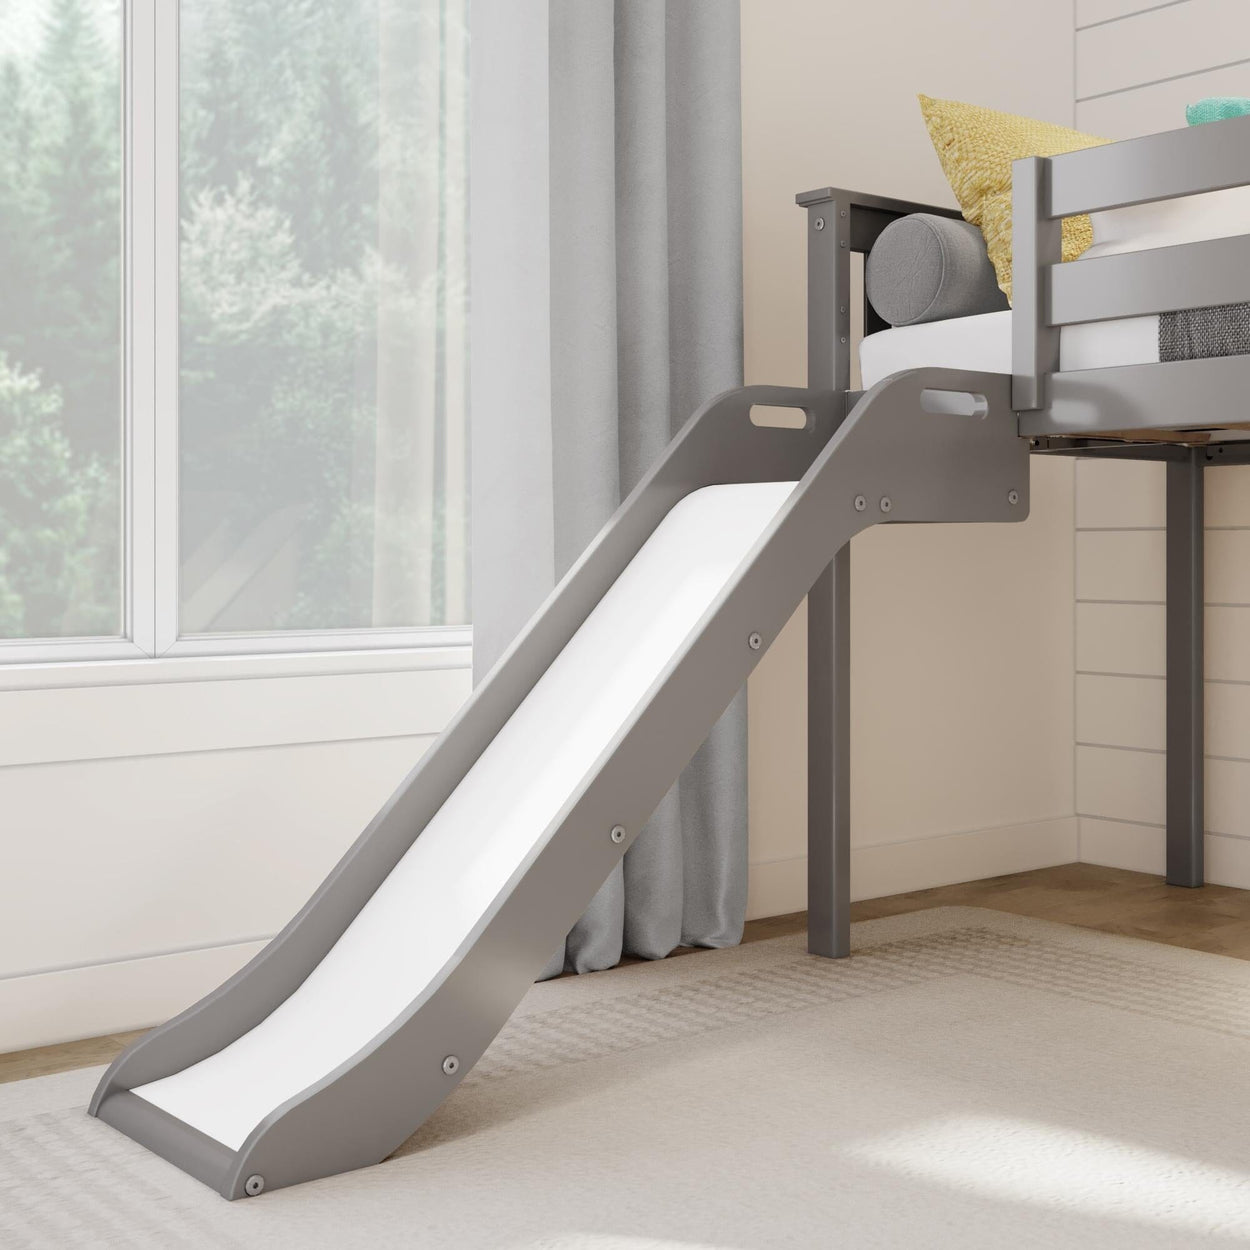 180425-121 : Loft Beds Classic Twin Low Loft with Stairs and Easy Slide, Grey